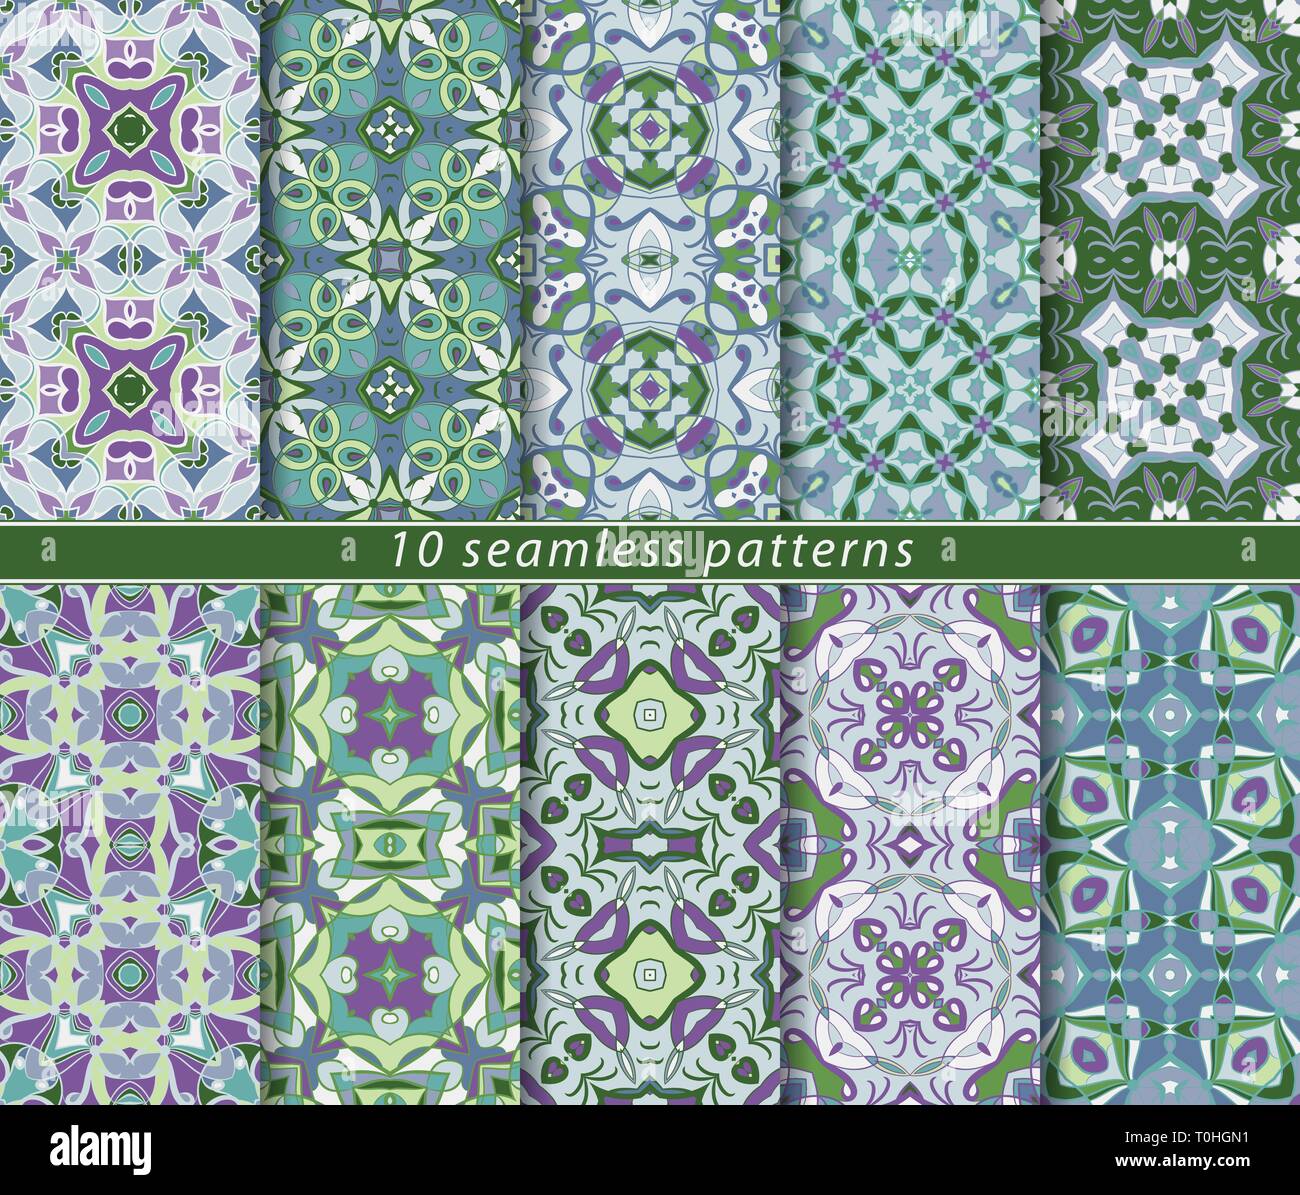 Set of ten classic seamless patterns in shades of blue and green. Decorative and design elements for textile, book covers, manufacturing, wallpapers,  Stock Vector